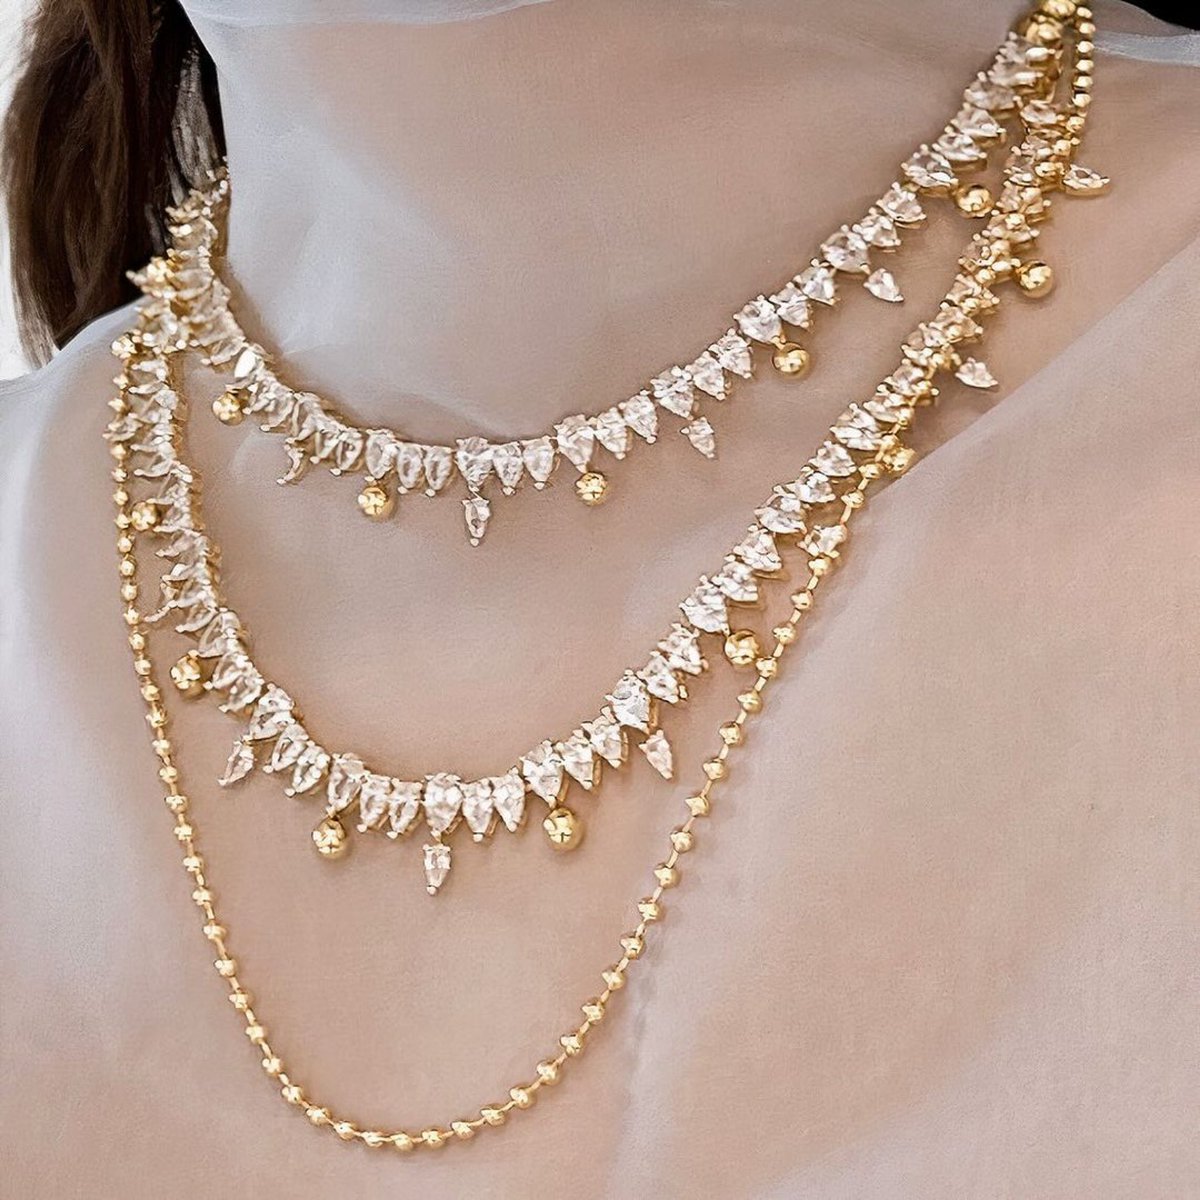 Our jewelry is designed to be a part of your legacy. #ShopBonheur #BonheurJewelry . #StatementNecklace #GiftsForHer #JewelryGifts